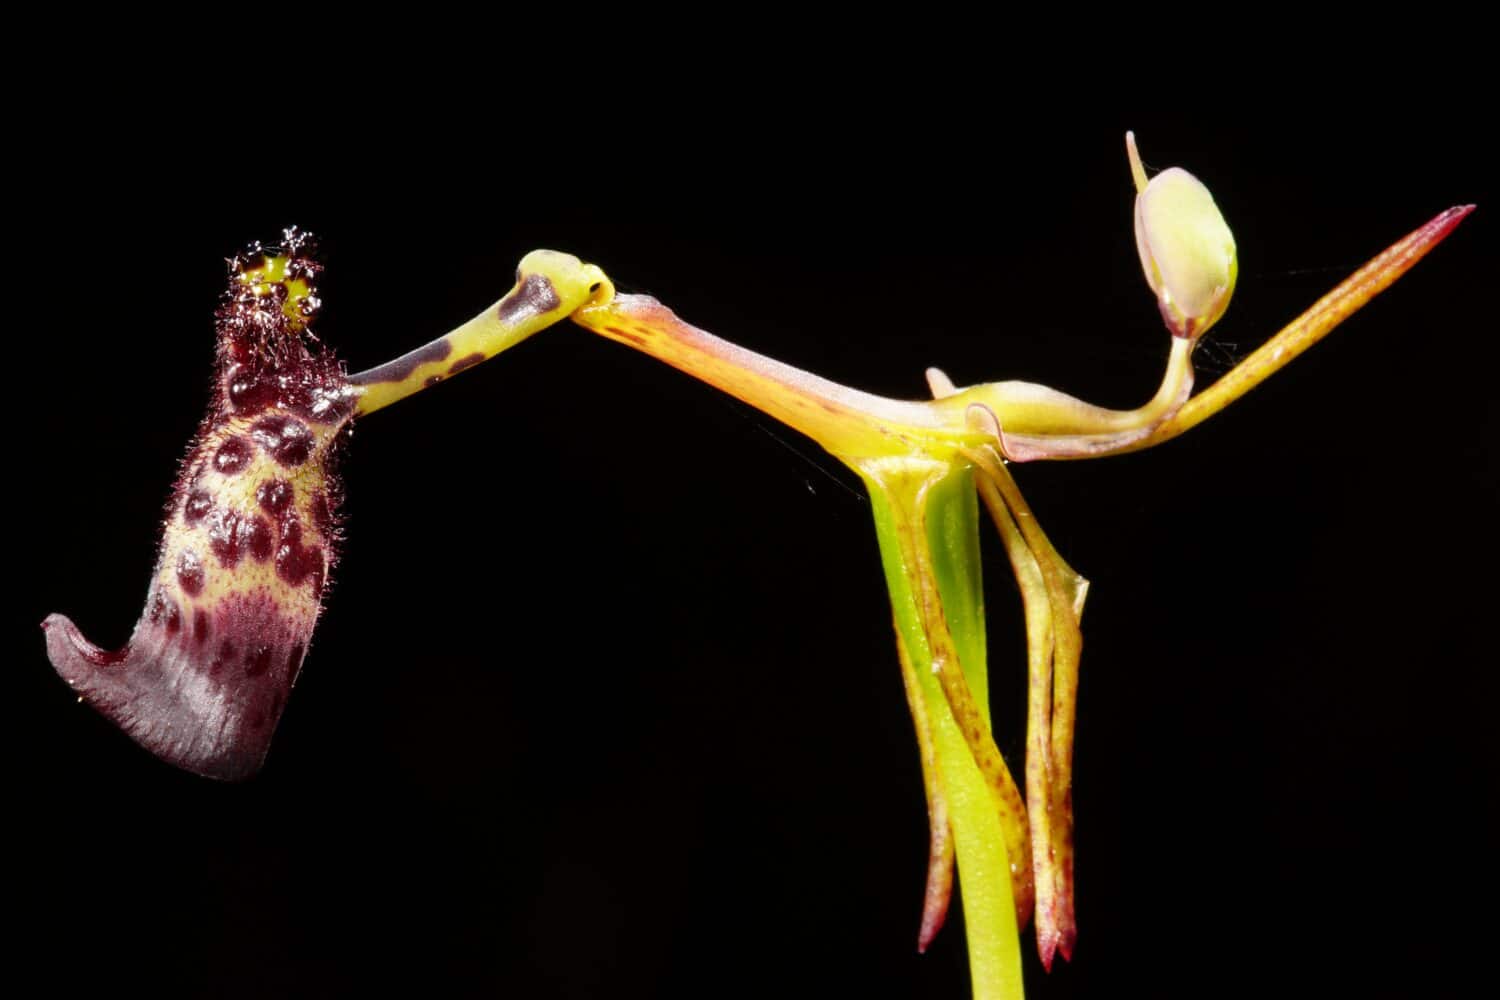 Flower of the rare warty hammer orchid (Drakaea livida), an endemic orchid species, Southwest Western Australia